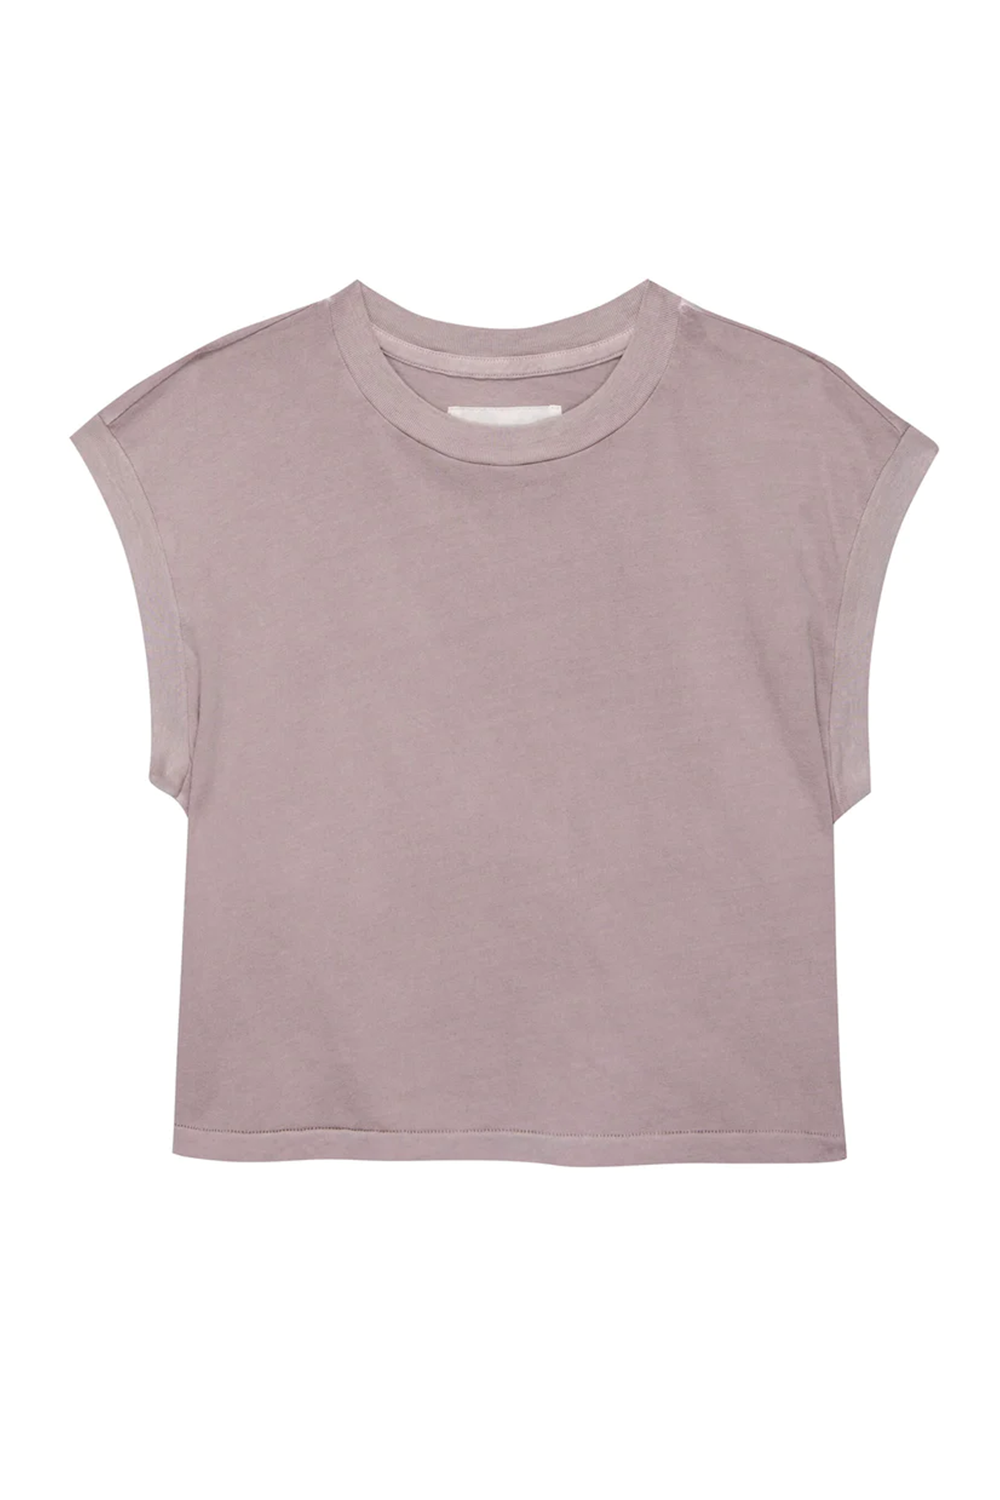 The Square Tee